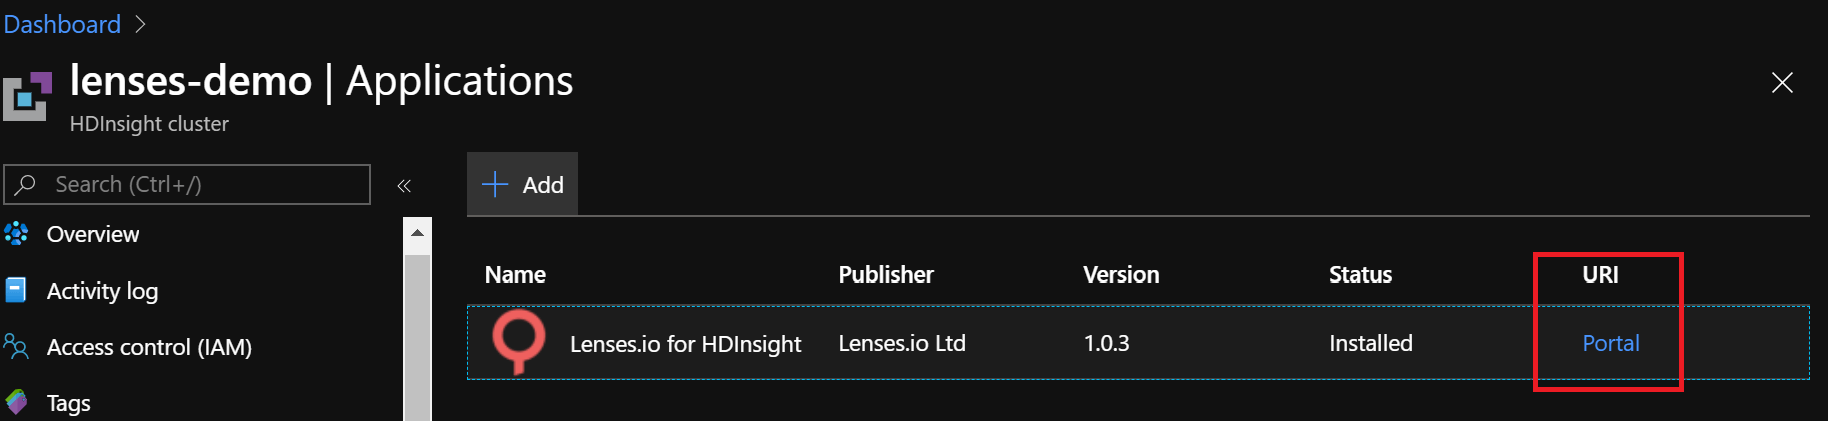 Log in to HDInsight with Lenses